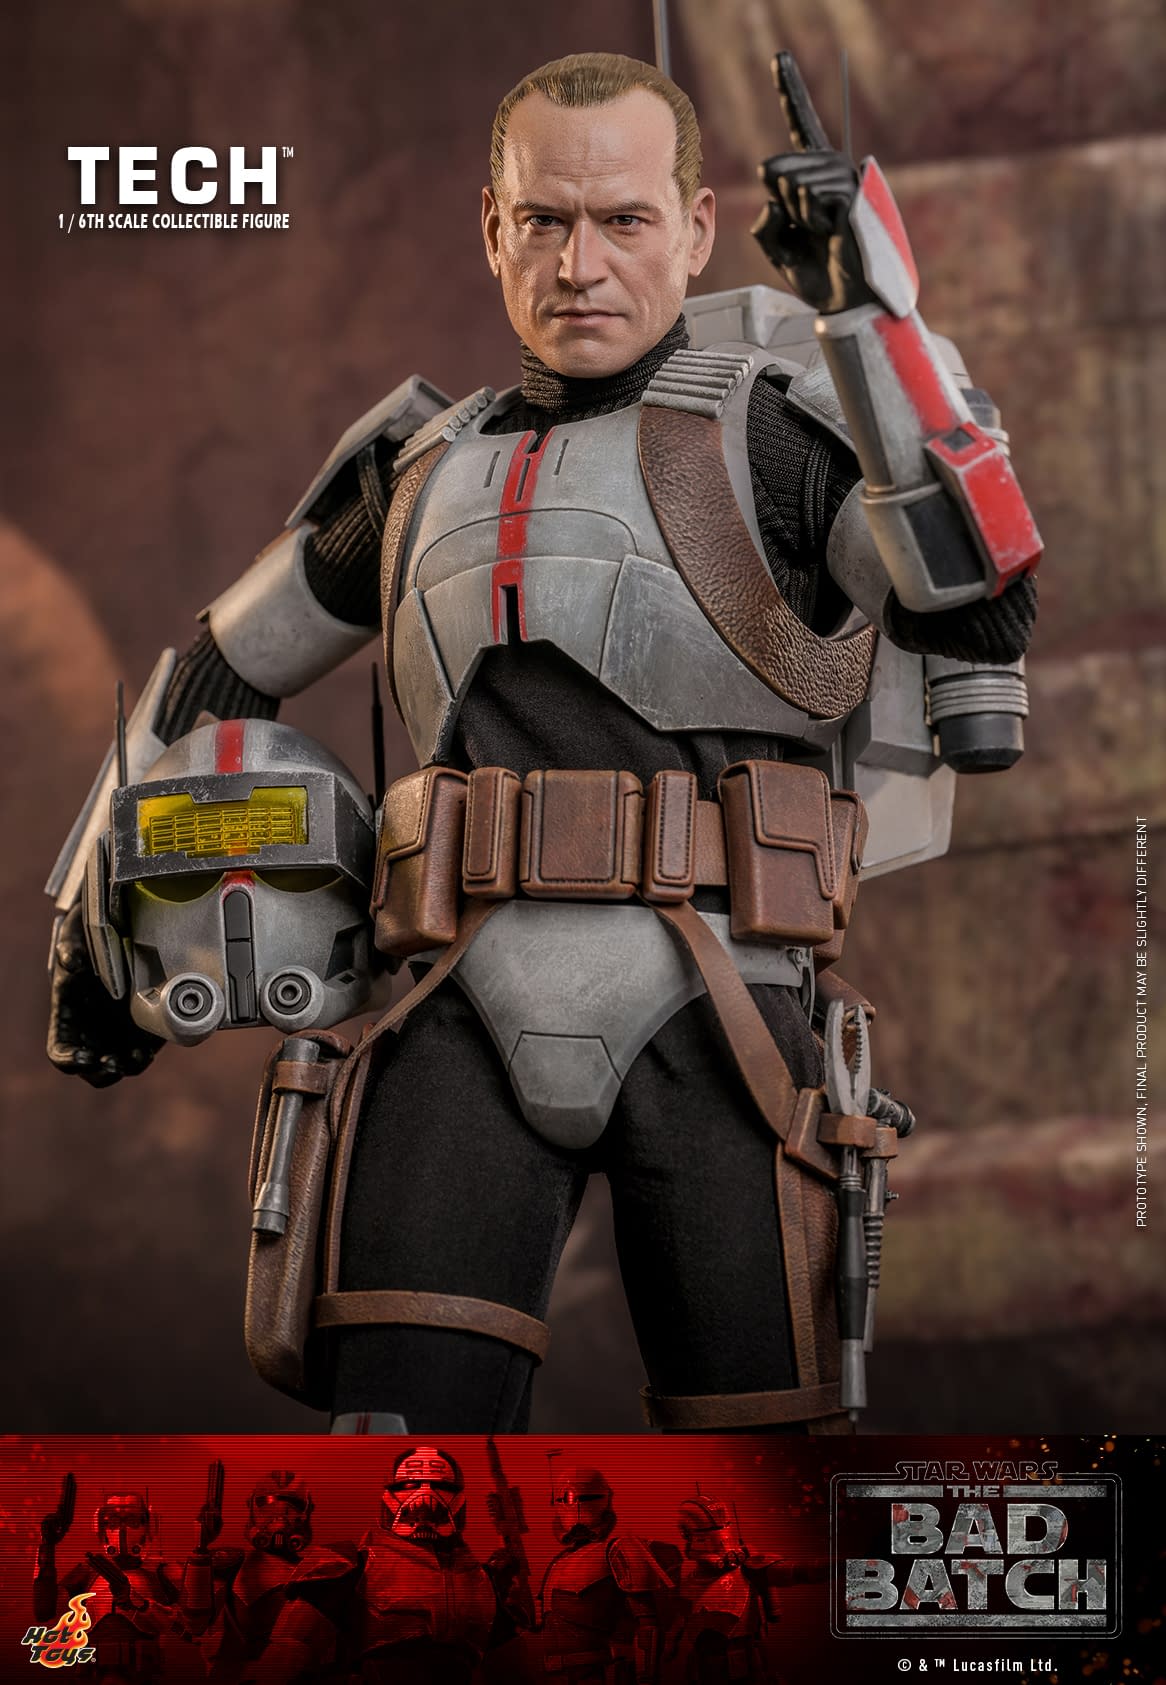 Make Room for The Bad Batch's Wrecker with Hot Toys Newest Release 